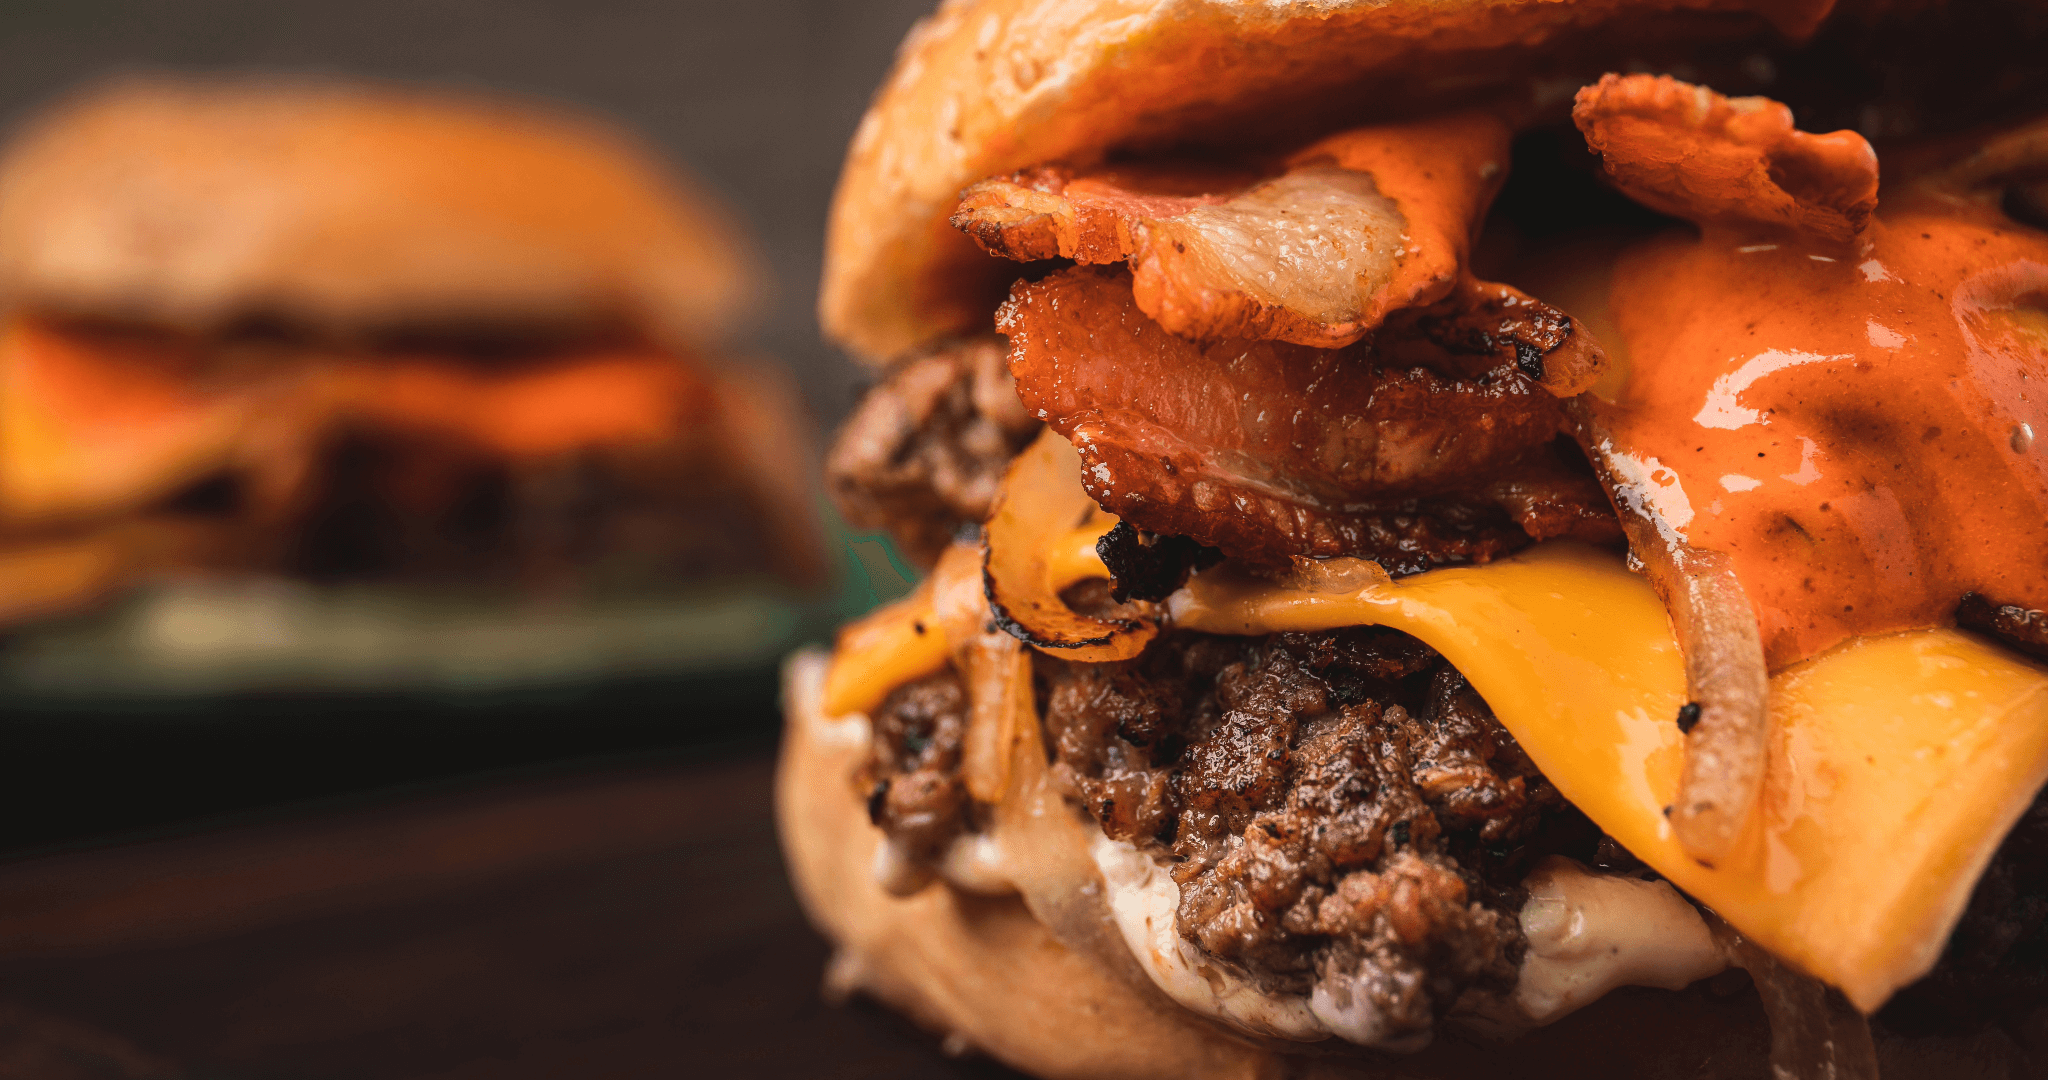 a smash burger with cheese and bacon ready to eat